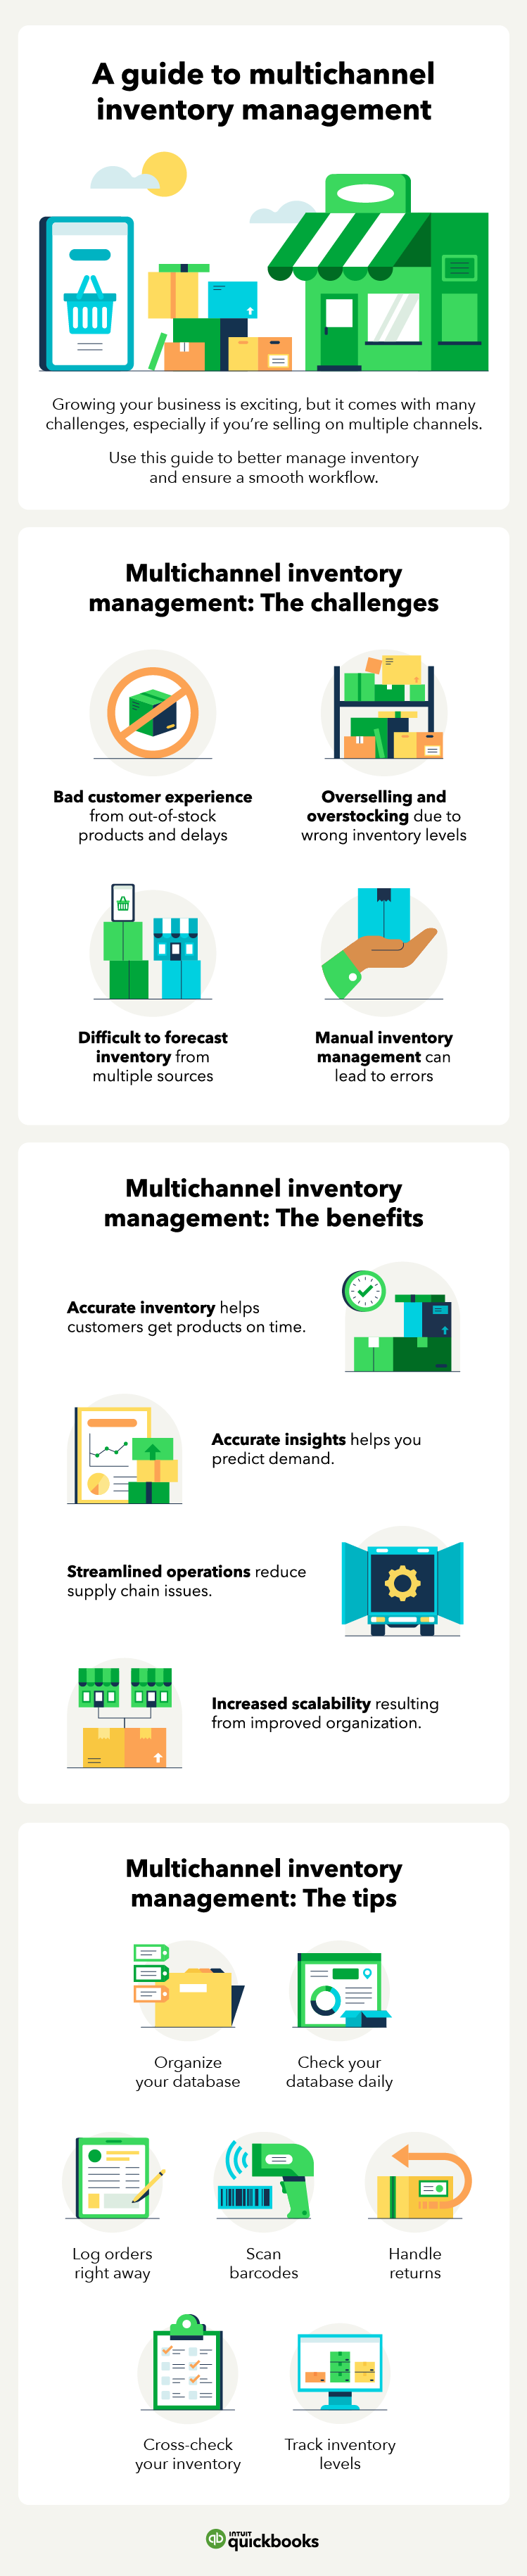 An infographic explaining multichannel inventory management challenges, benefits, and tips.